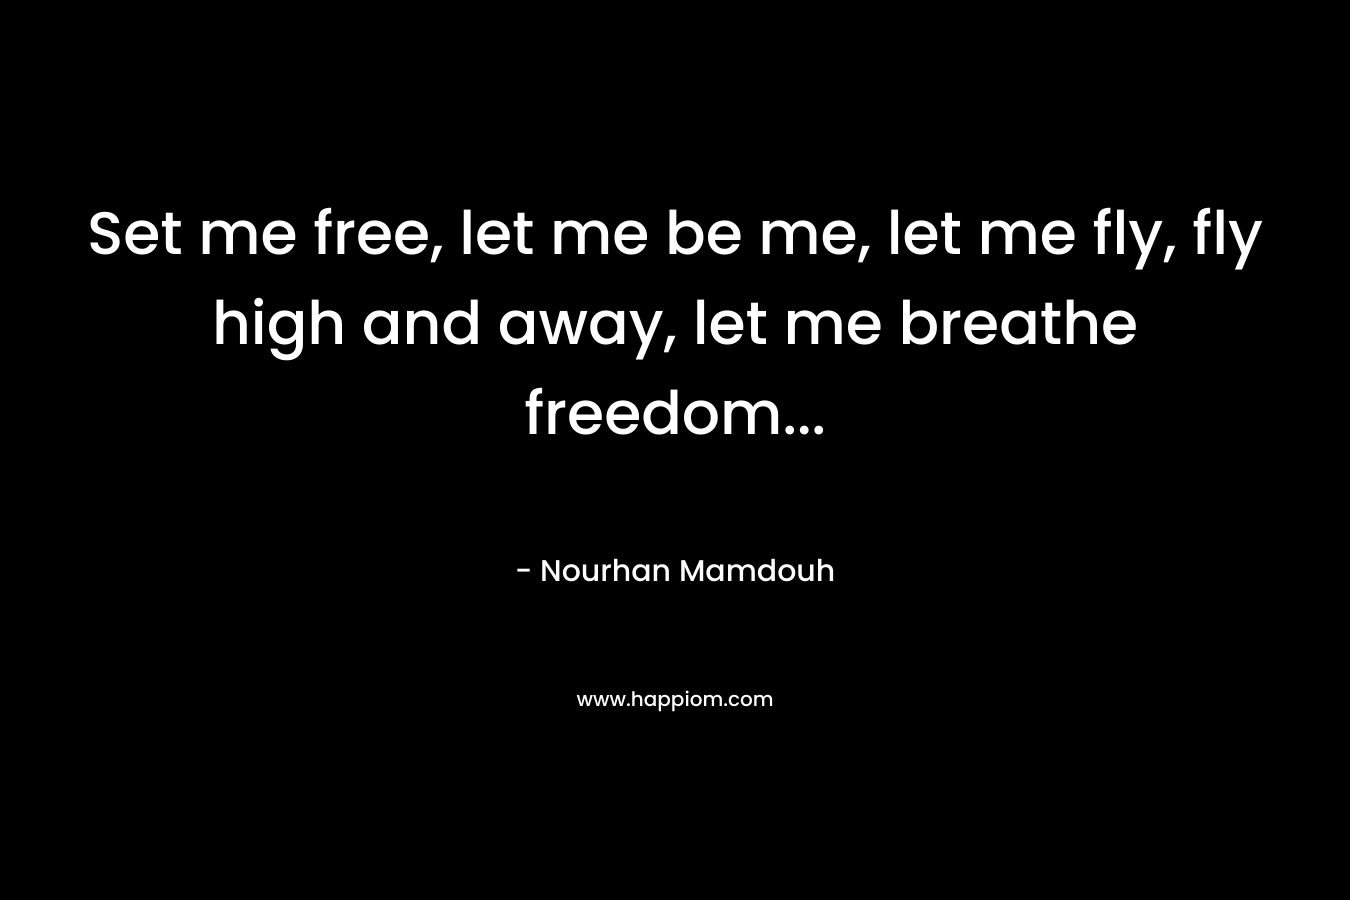 Set me free, let me be me, let me fly, fly high and away, let me breathe freedom… – Nourhan Mamdouh